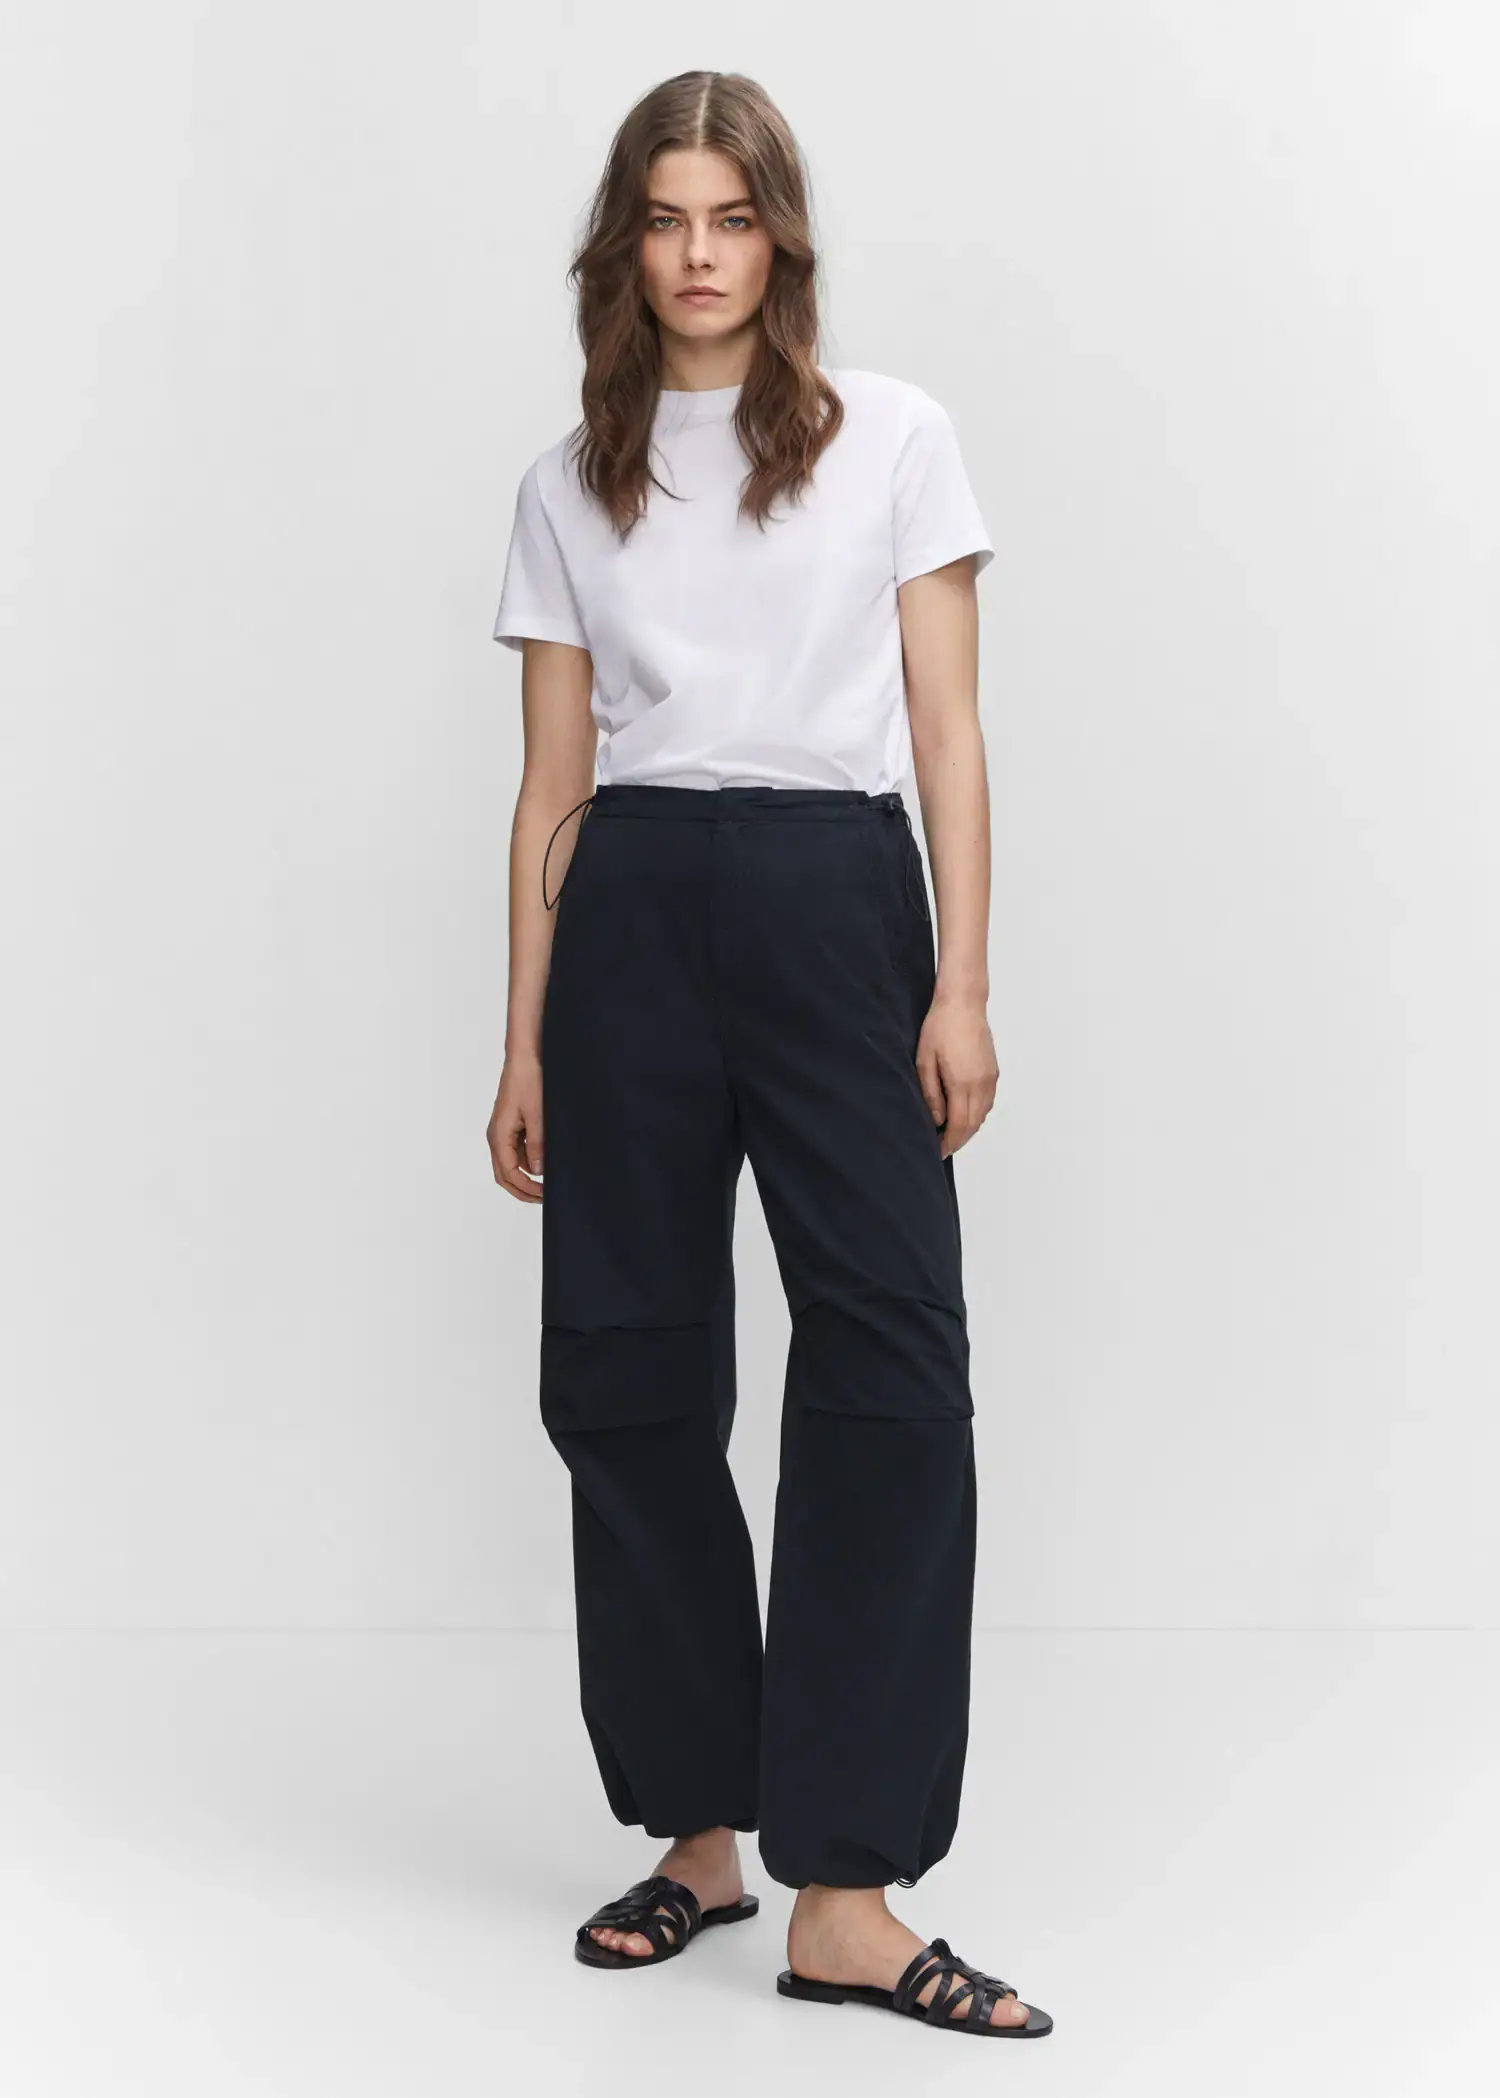 Mango Parachute trousers. a woman standing in front of a white wall. 